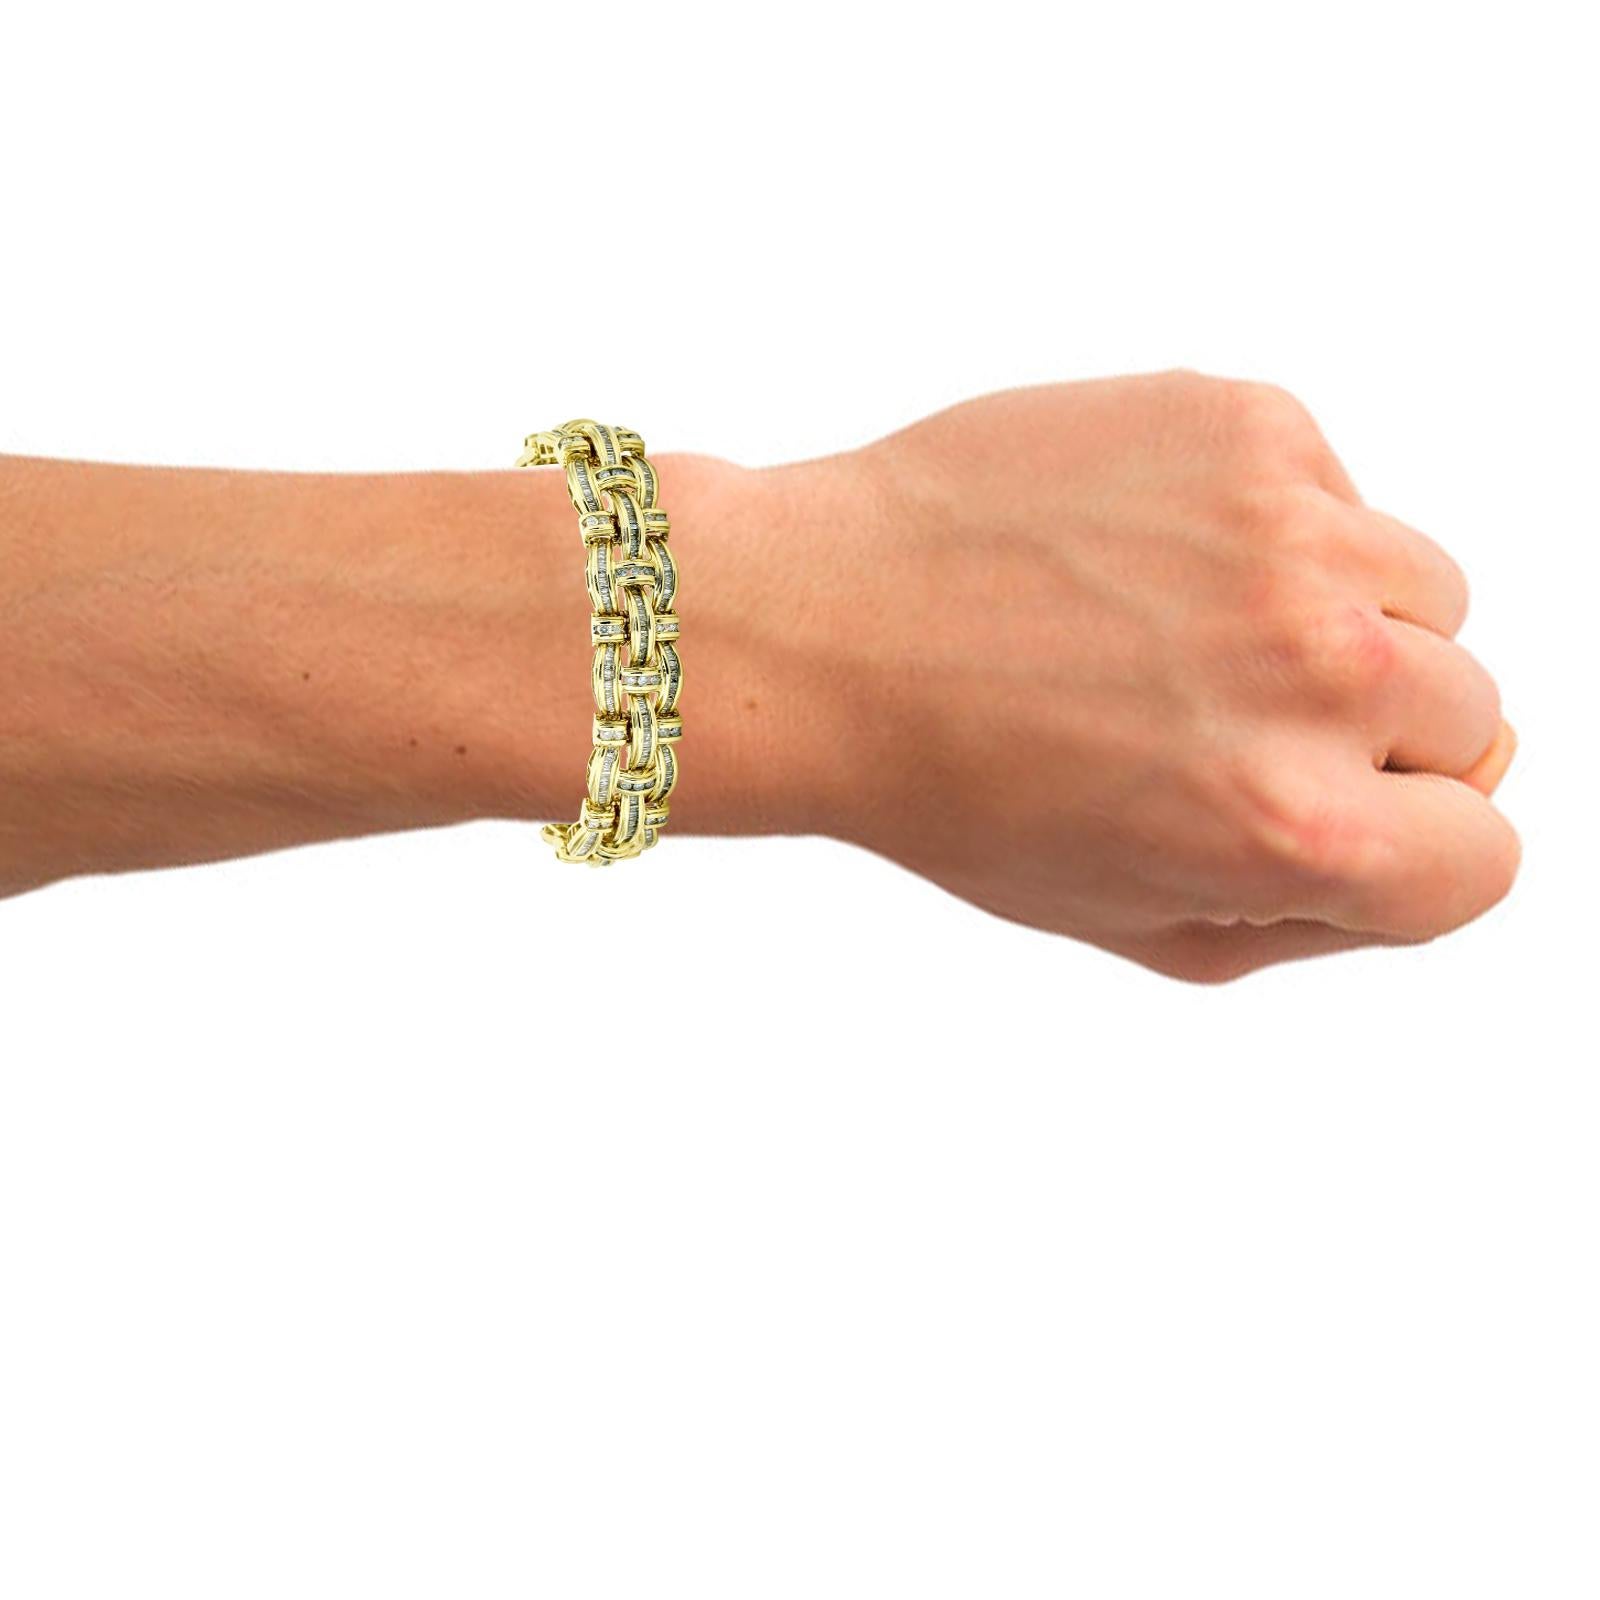 Men's diamond link bracelet in 14-karat yellow gold. Comes with appraisal. Retail replacement value according to appraisal $28,462.60. Diamond color H, clarity I. Push clasp. 

Size, Medium - Large (fits a wrist up to 7.5 inches)
Length, 8.375